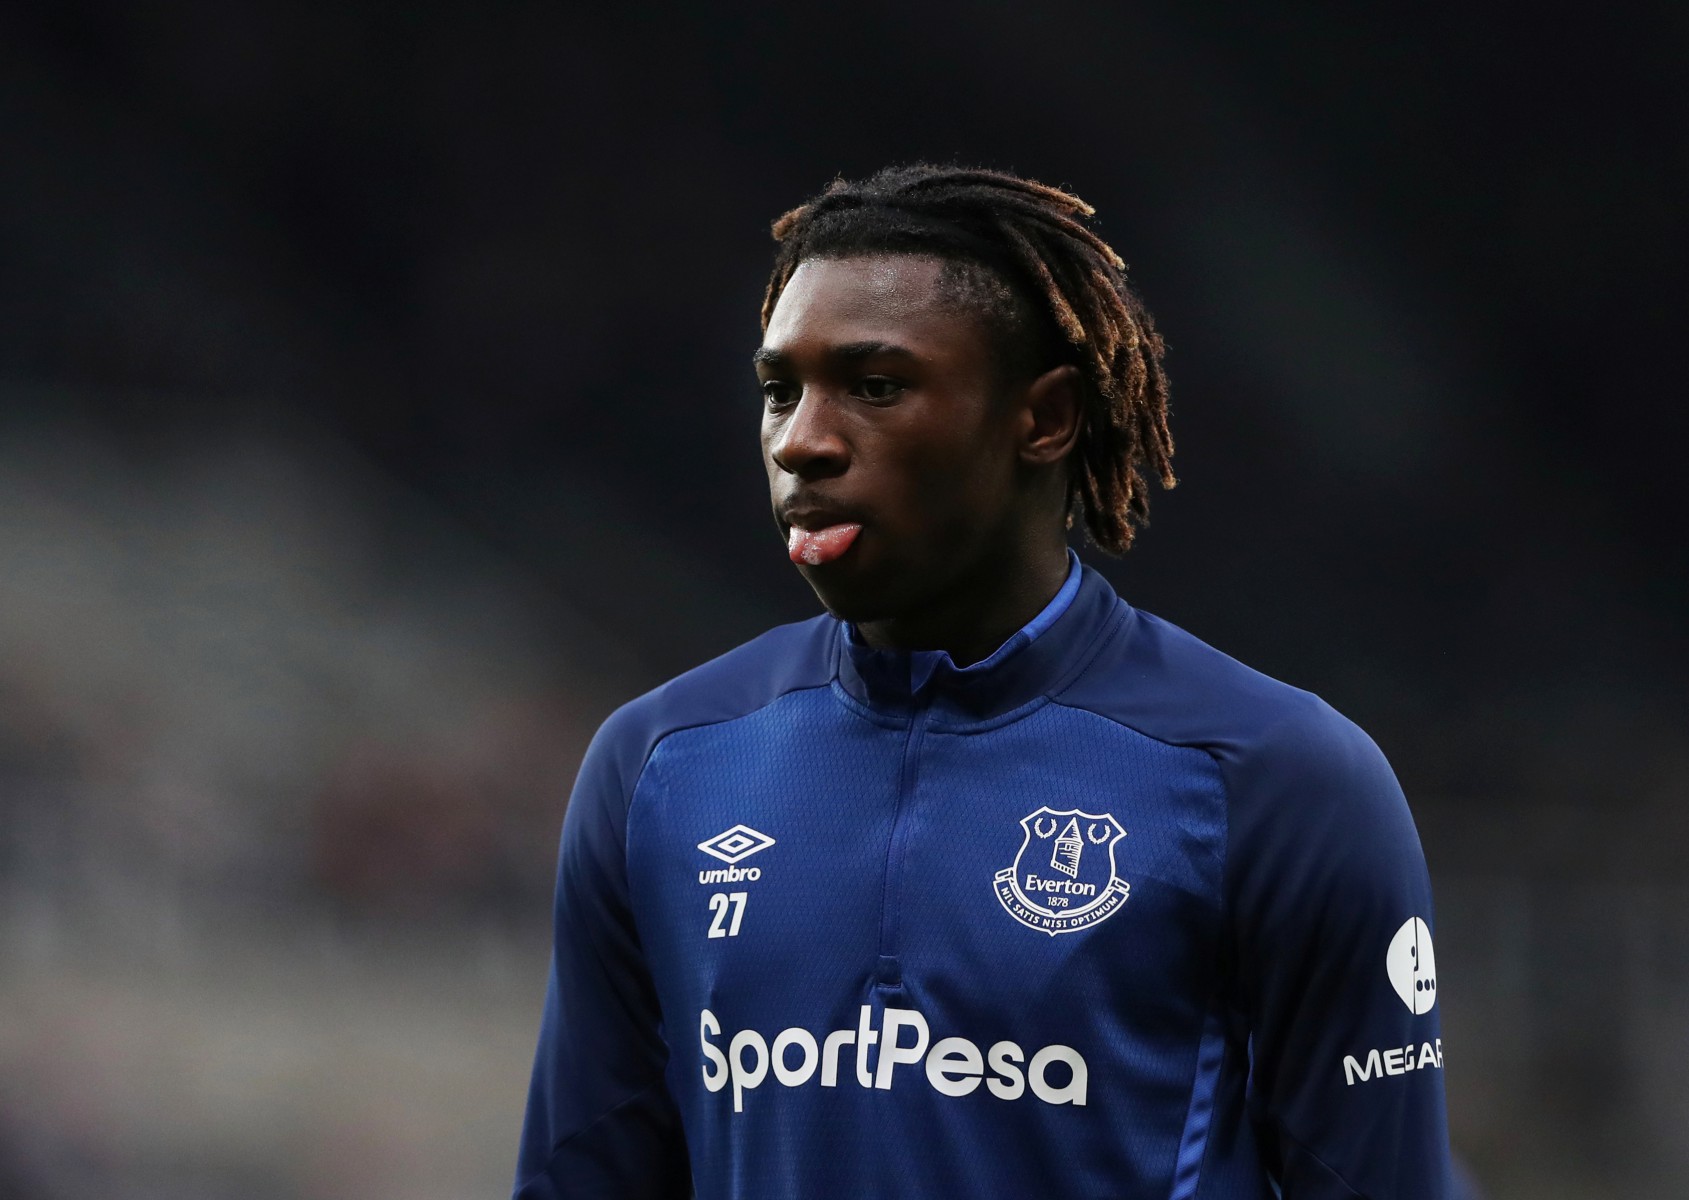 , Football betting tips: Kean to score for Everton, goals galore at Forest vs Leeds and De Bruyne back on scoresheet